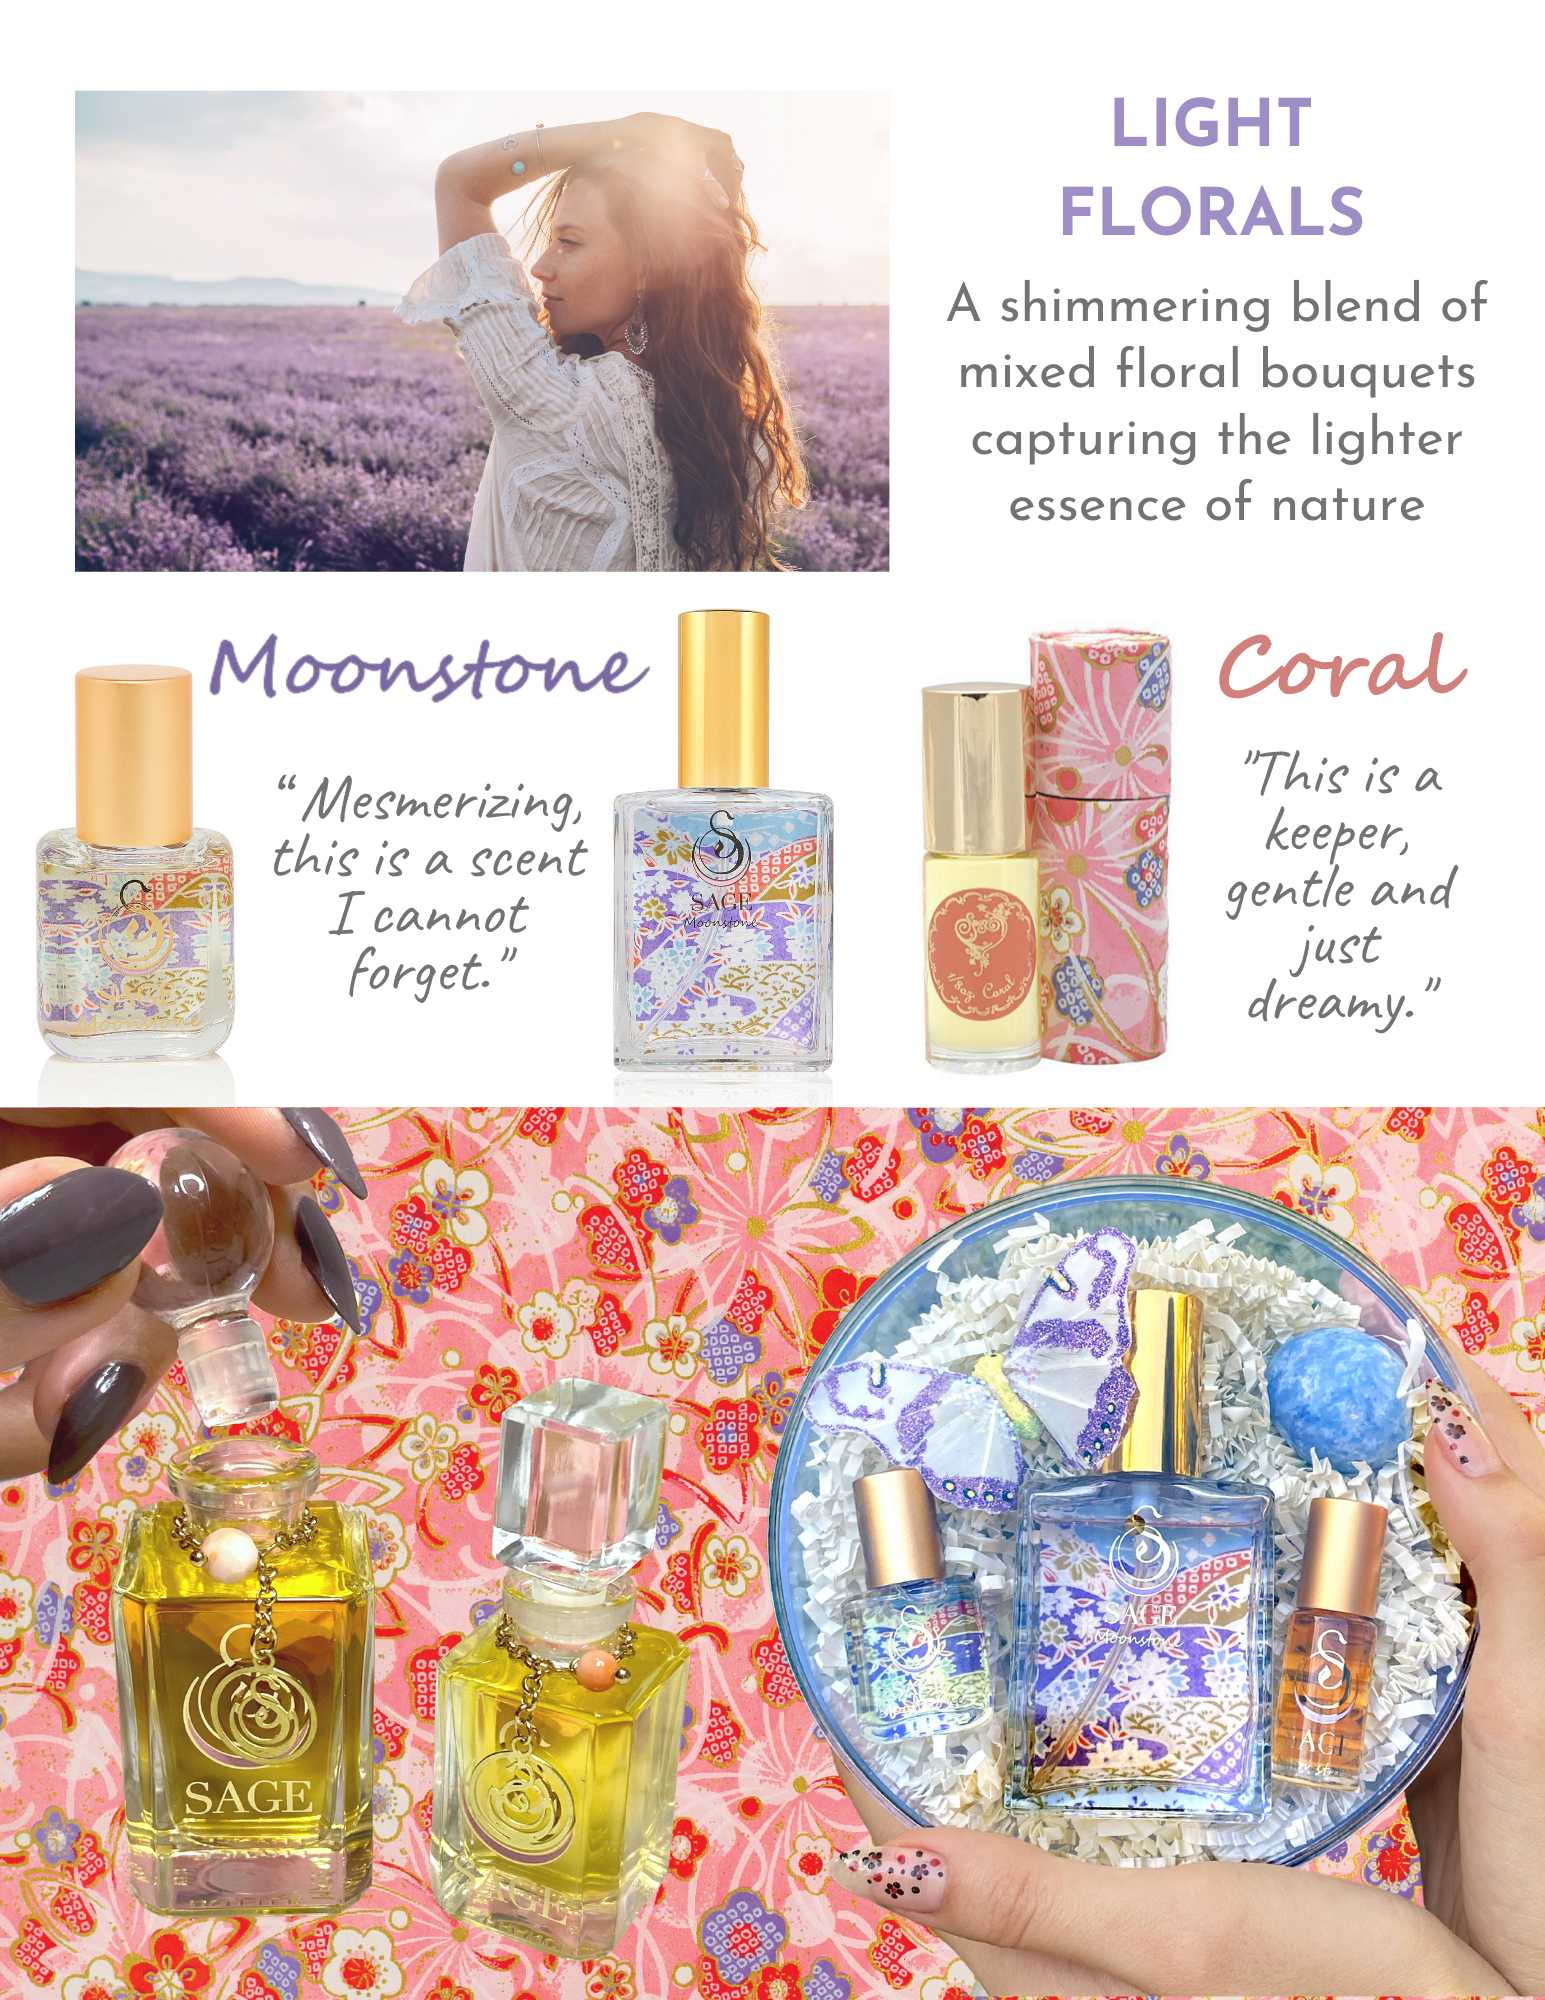 image of monstone and coral perfume bottles and words “Light florals a shimmering blend of mixed floral bouquets capturing the lighter essence of nature” “moonstone mesmerizing this is a scent I cannot forget” “coral this is a keeper gentle and just dreamy”.